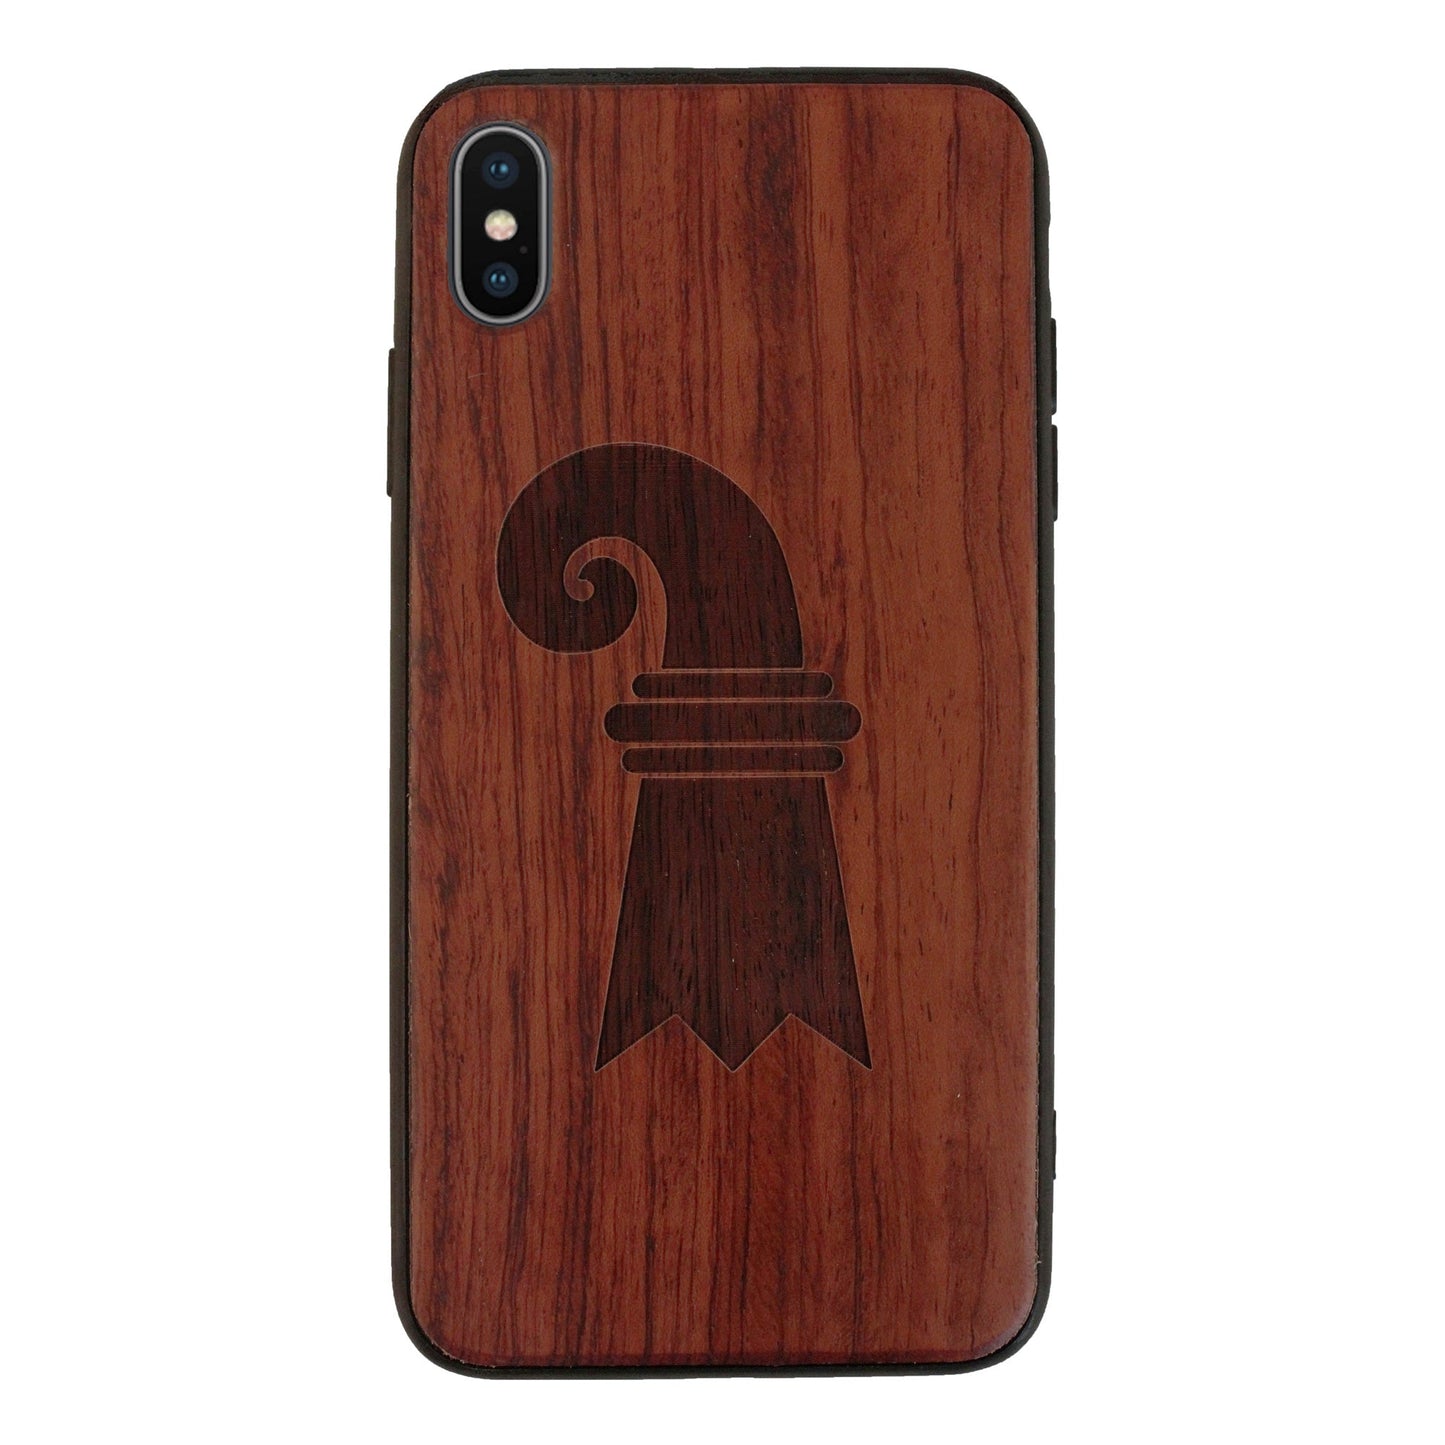 Baslerstab Eden case made of rosewood for iPhone X/XS